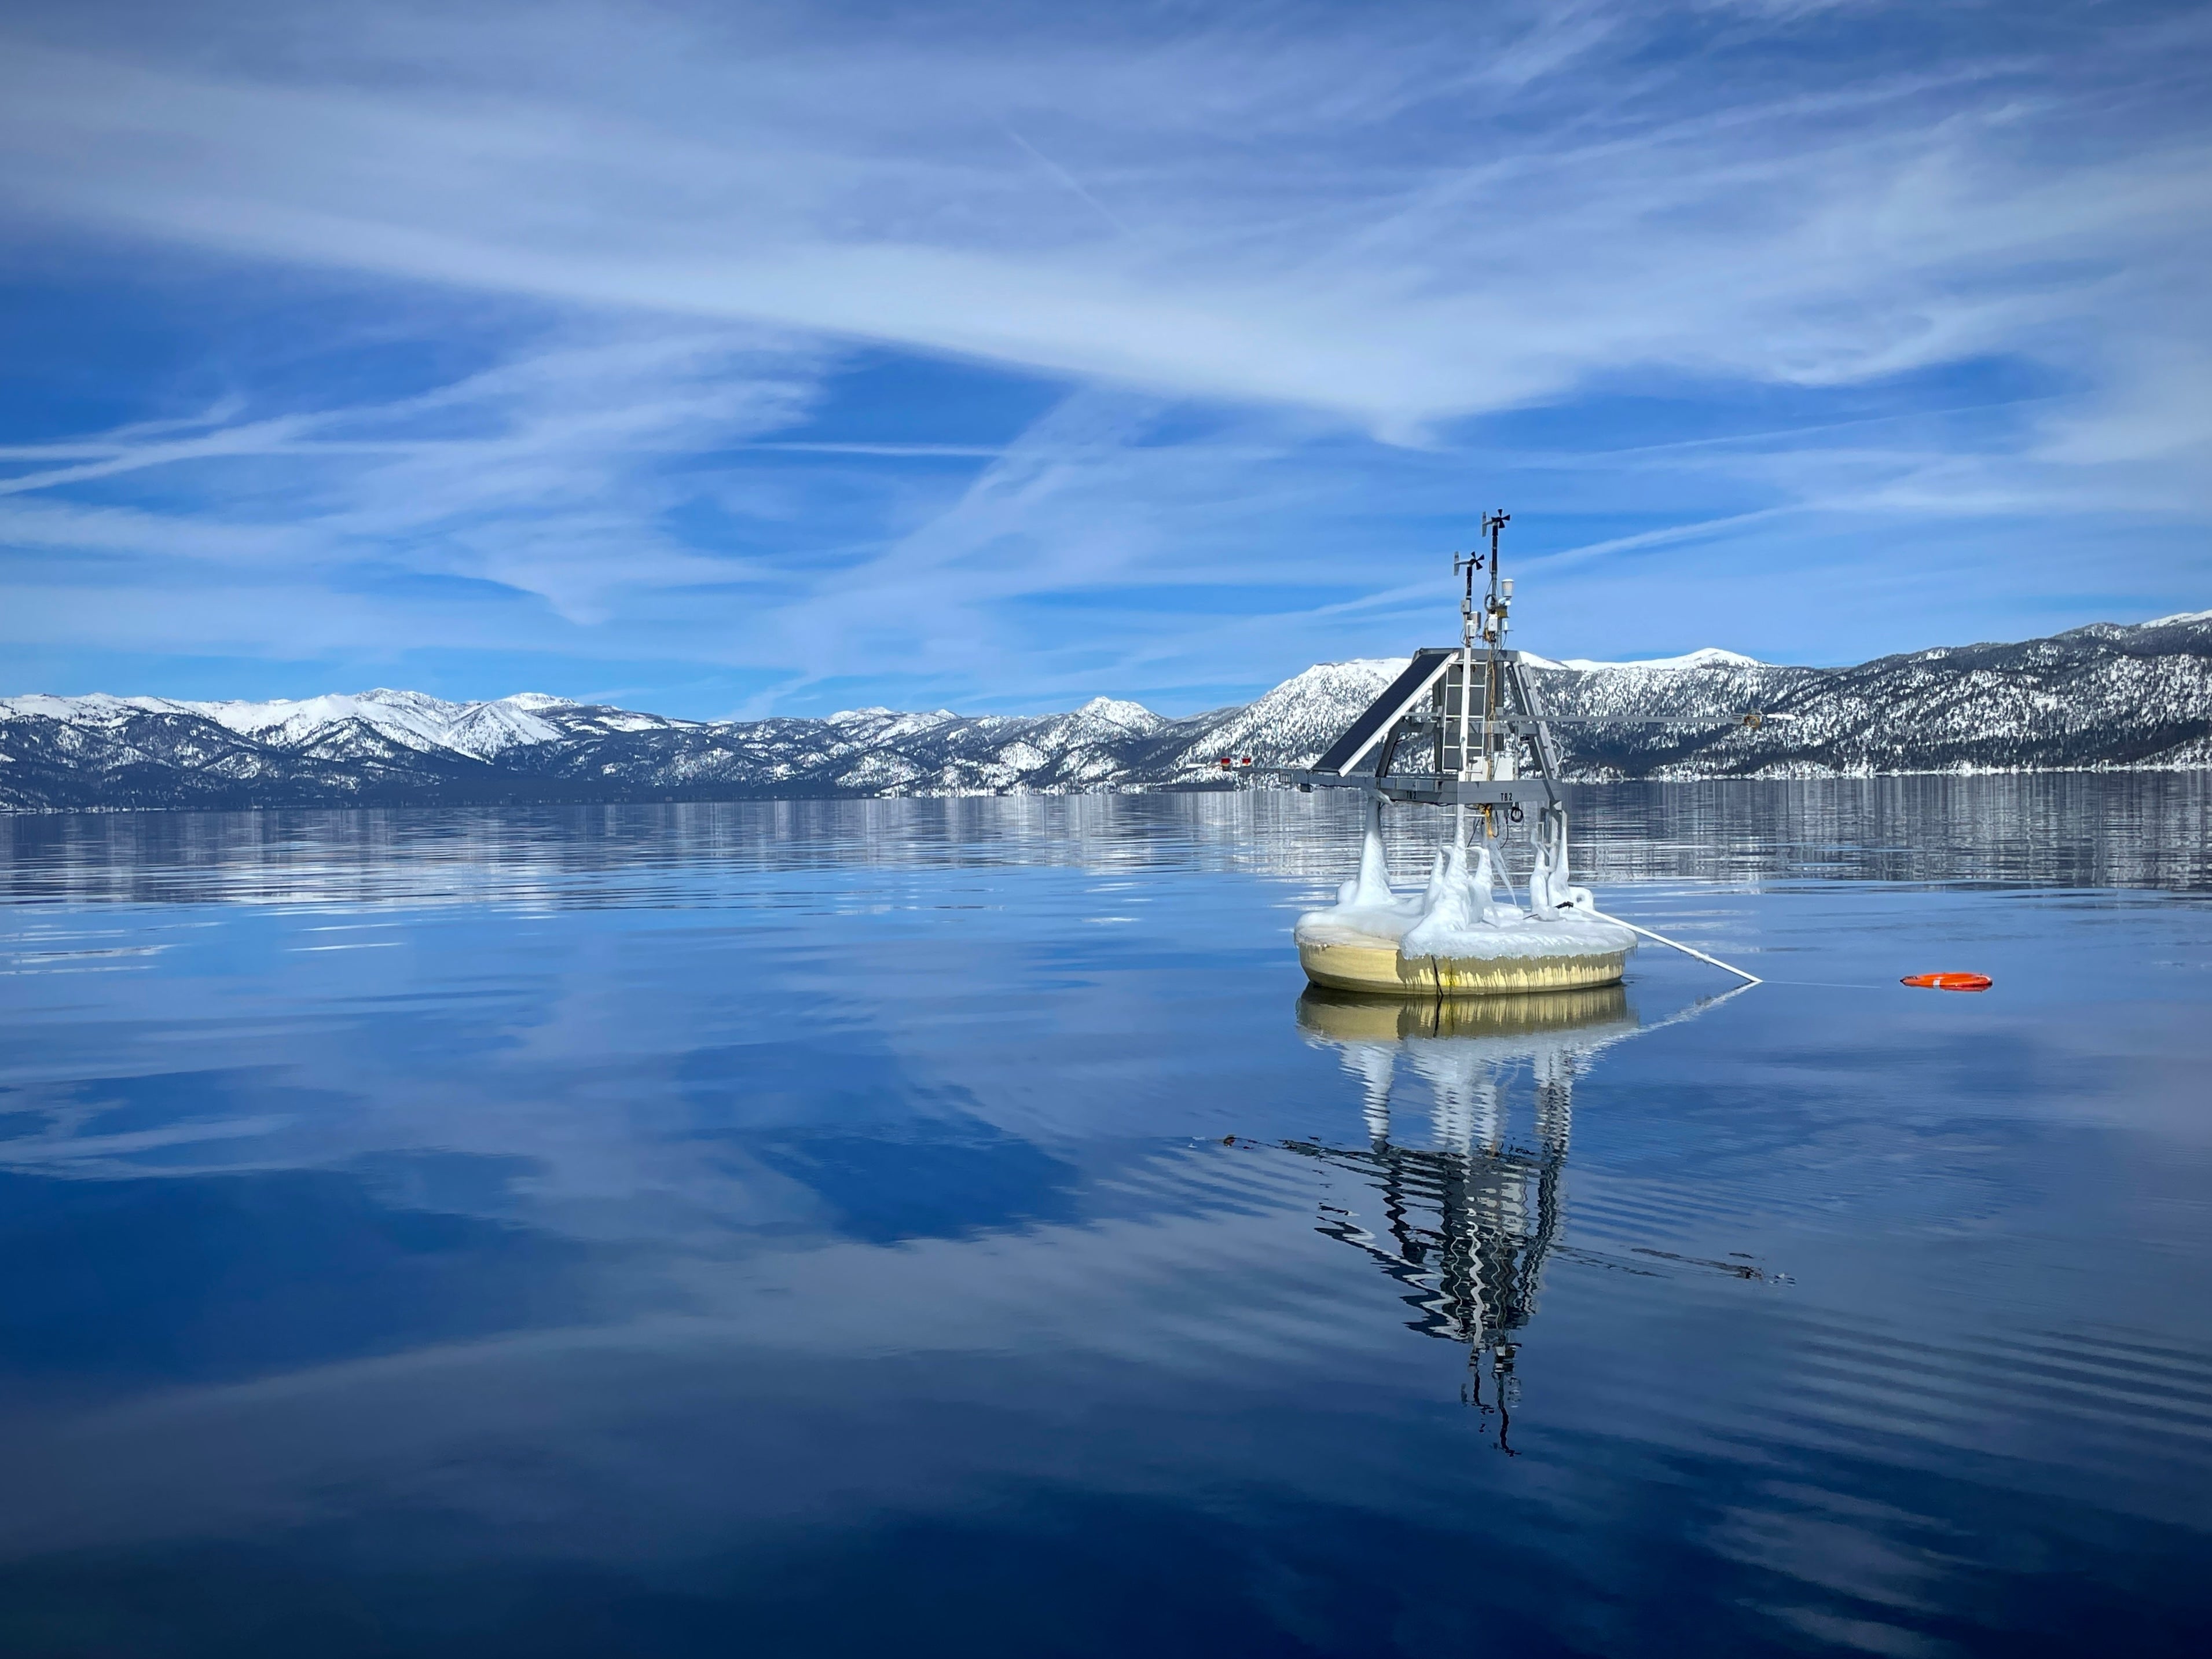 A buoy on the calm winter surface of Lake Tahoe